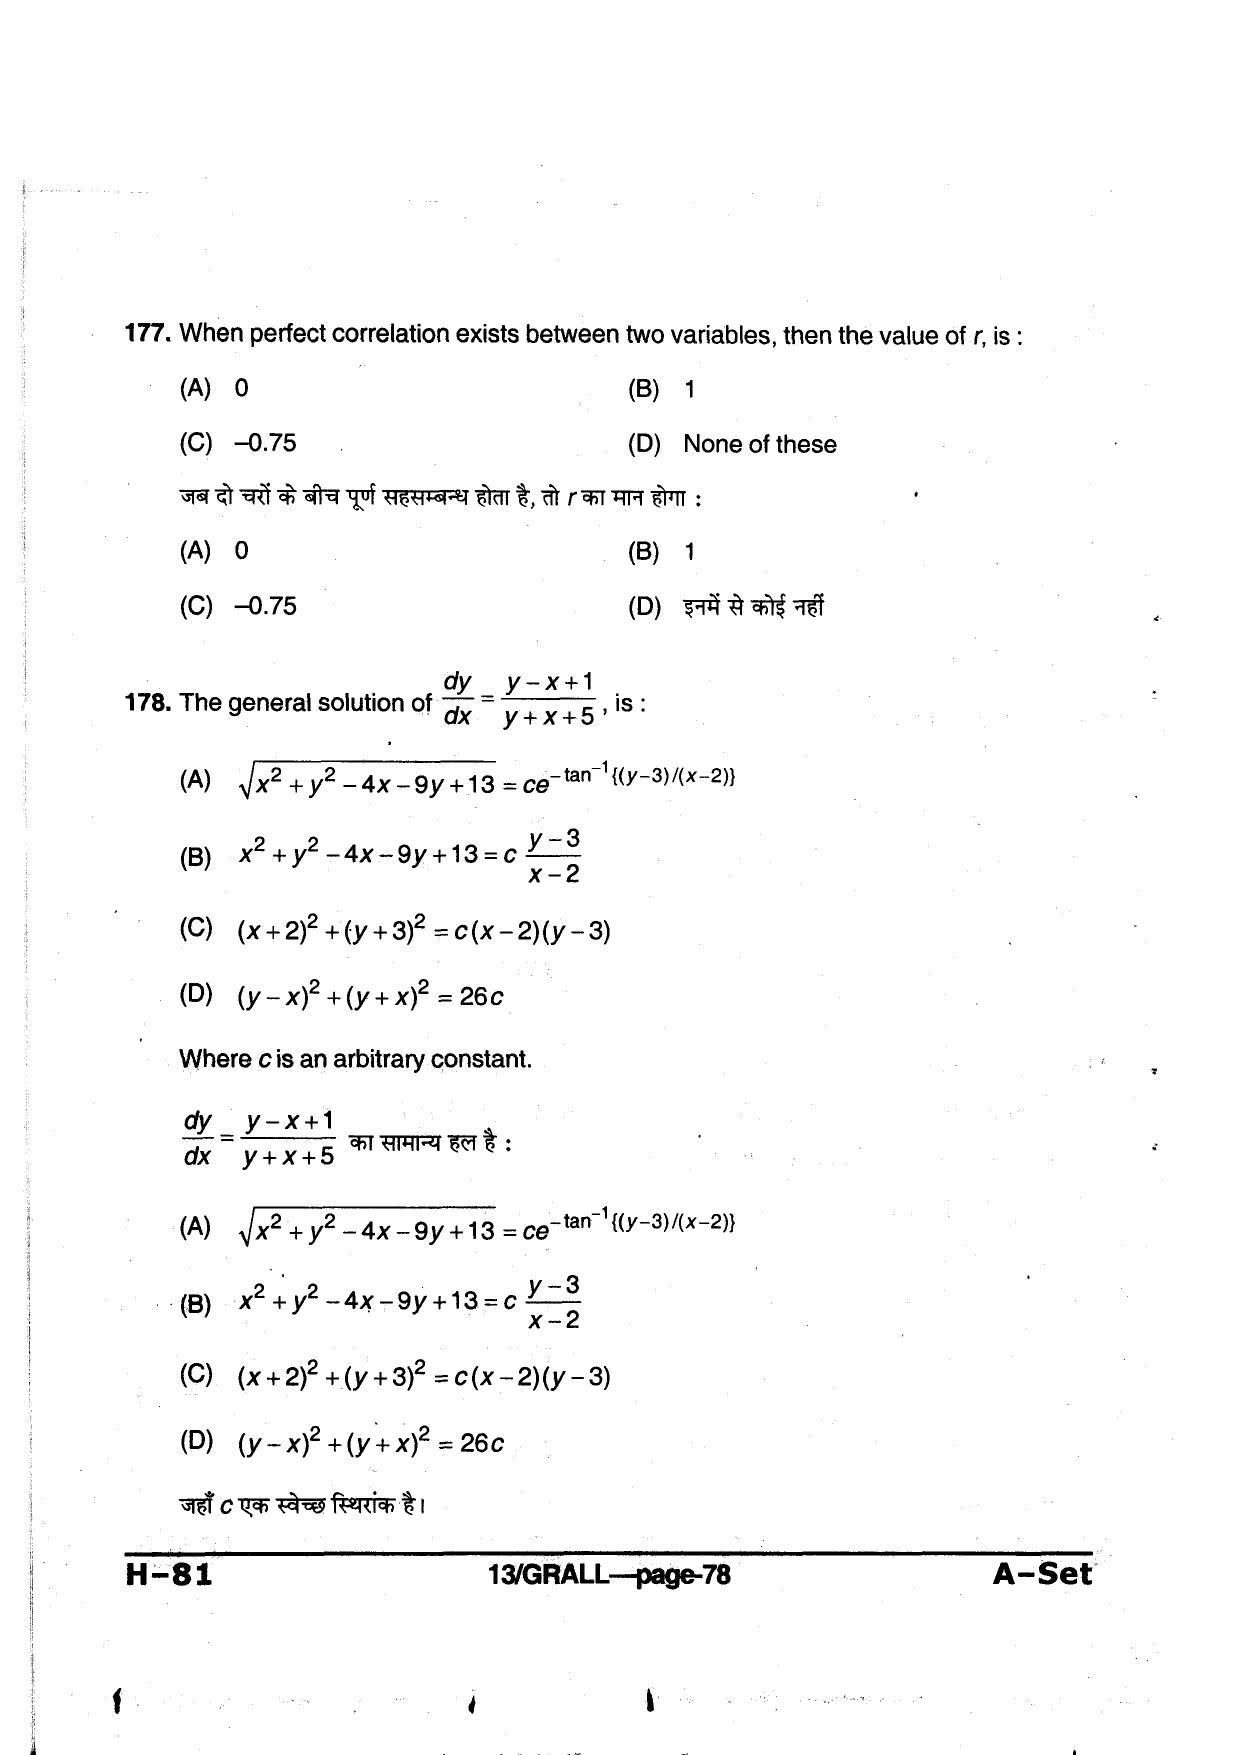 MP PAT 2013 Question Paper - Paper I - Page 78